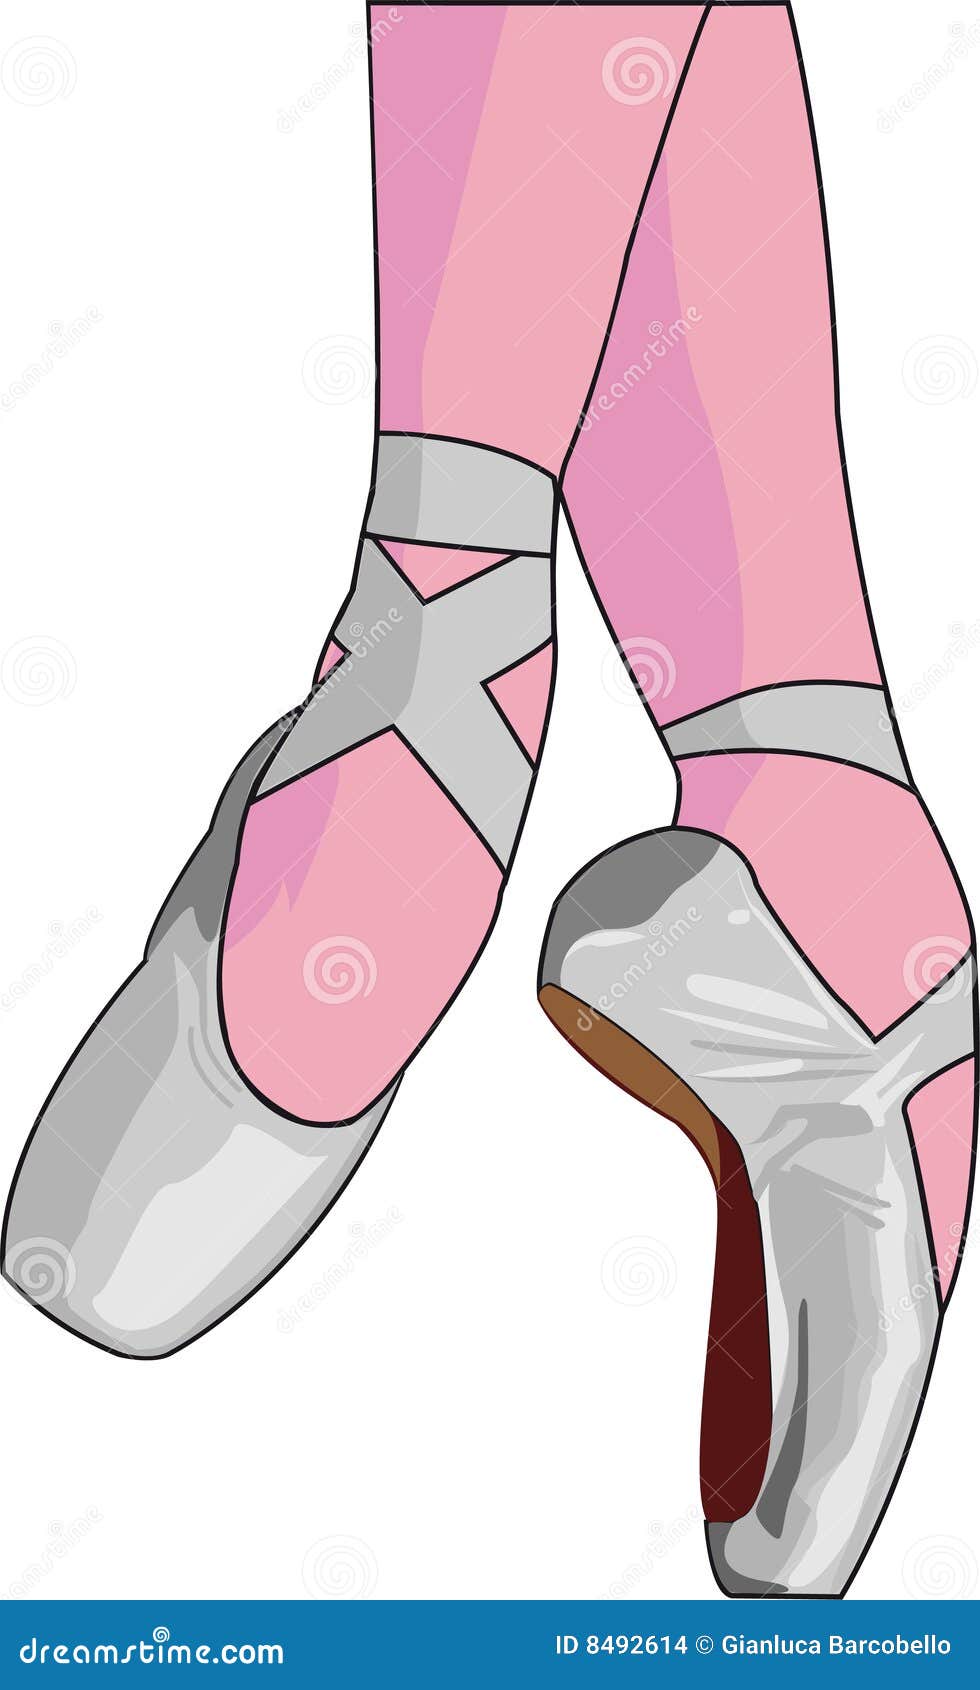 Dancing on pointe stock vector. Illustration of vector - 8492614